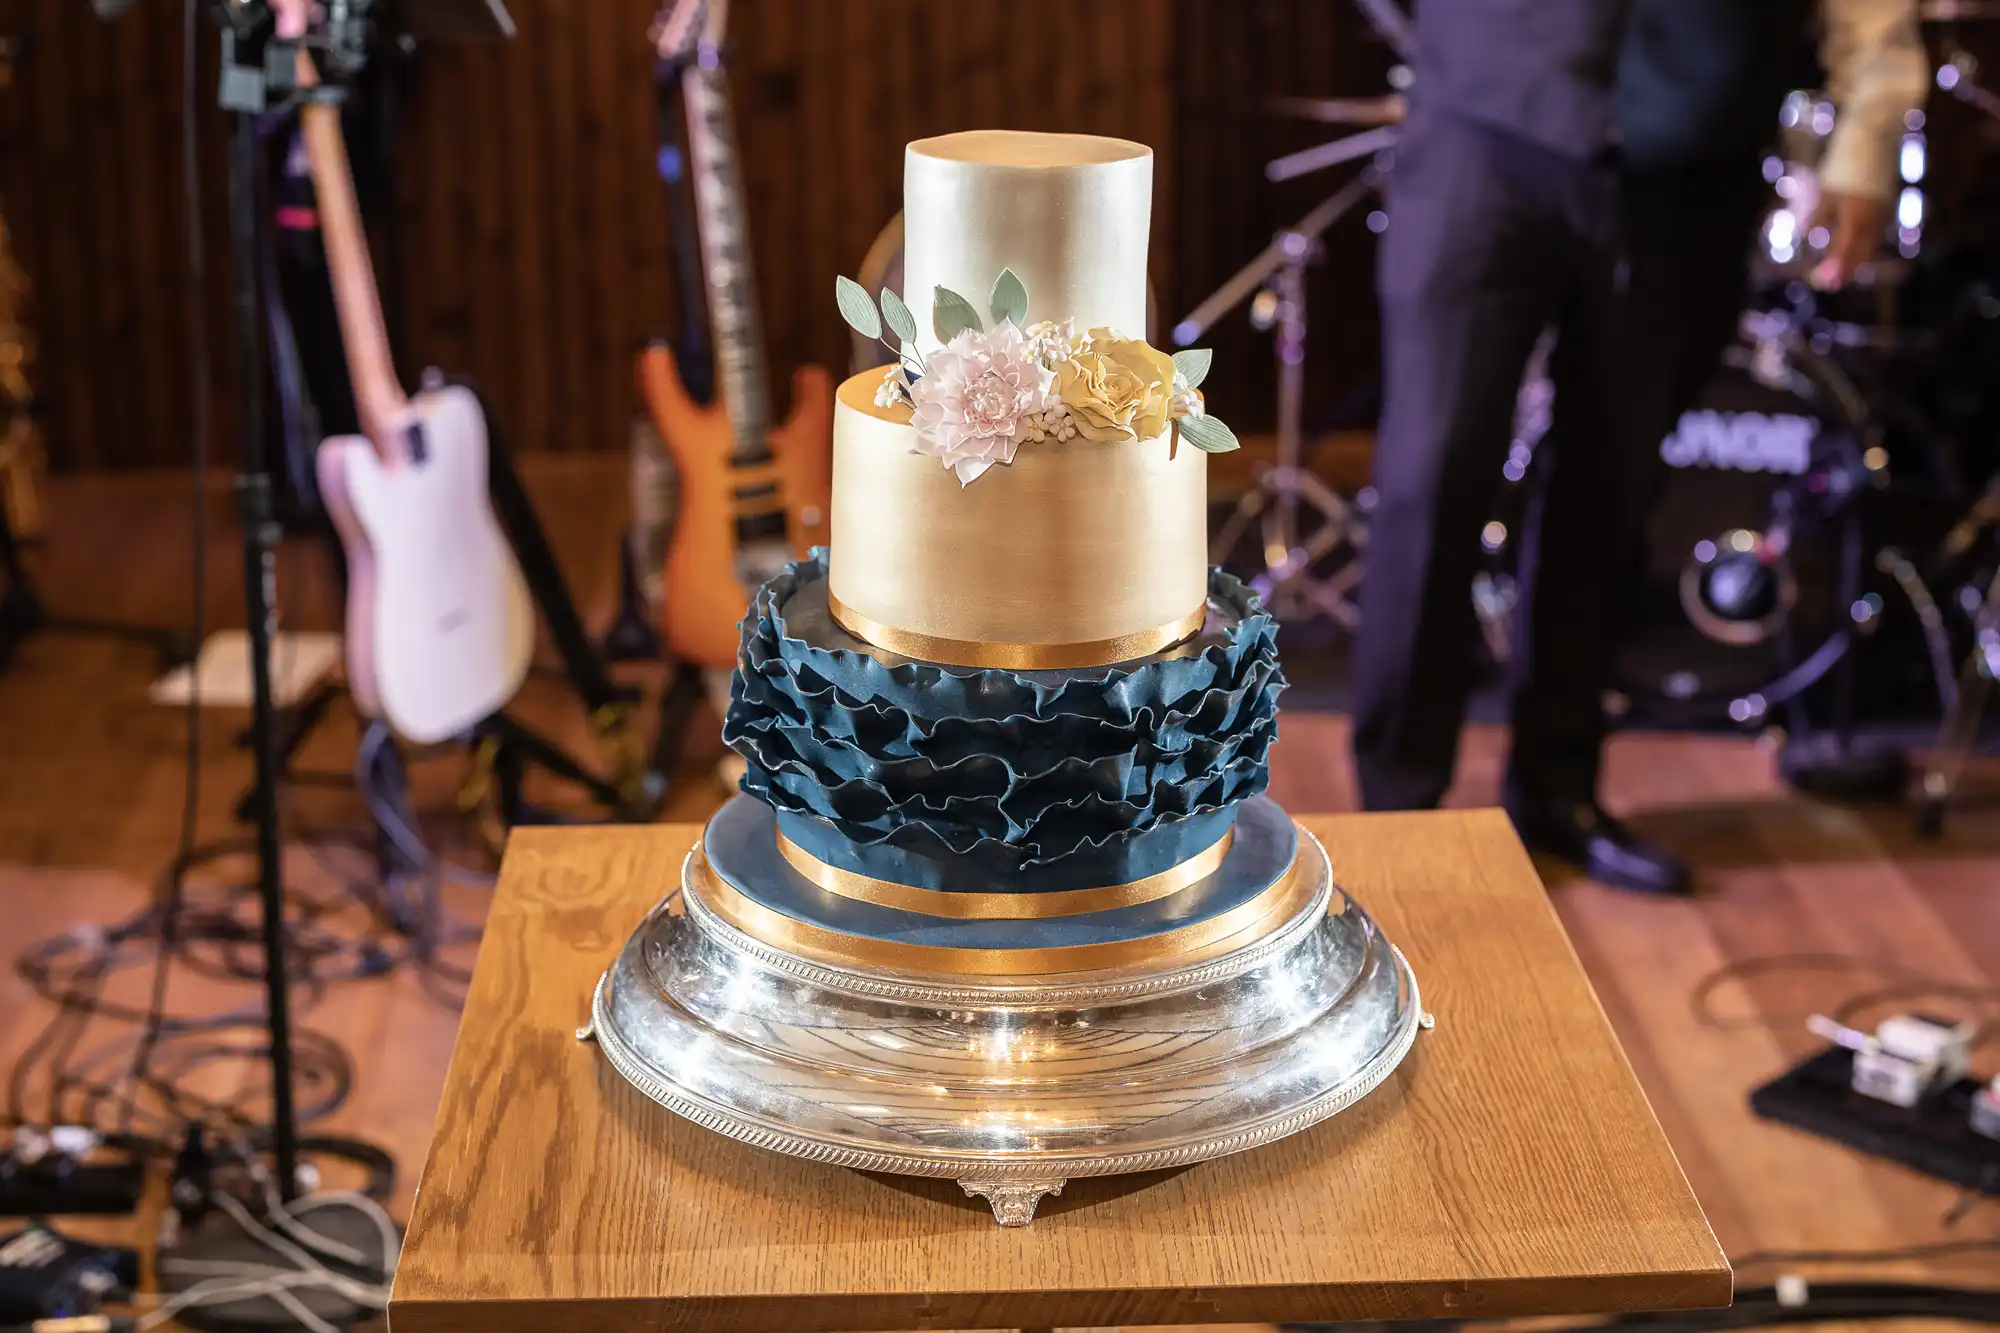 A three-tiered wedding cake adorned with gold and navy layers, accented with pink flowers, displayed on a silver stand with musical instruments in the background.